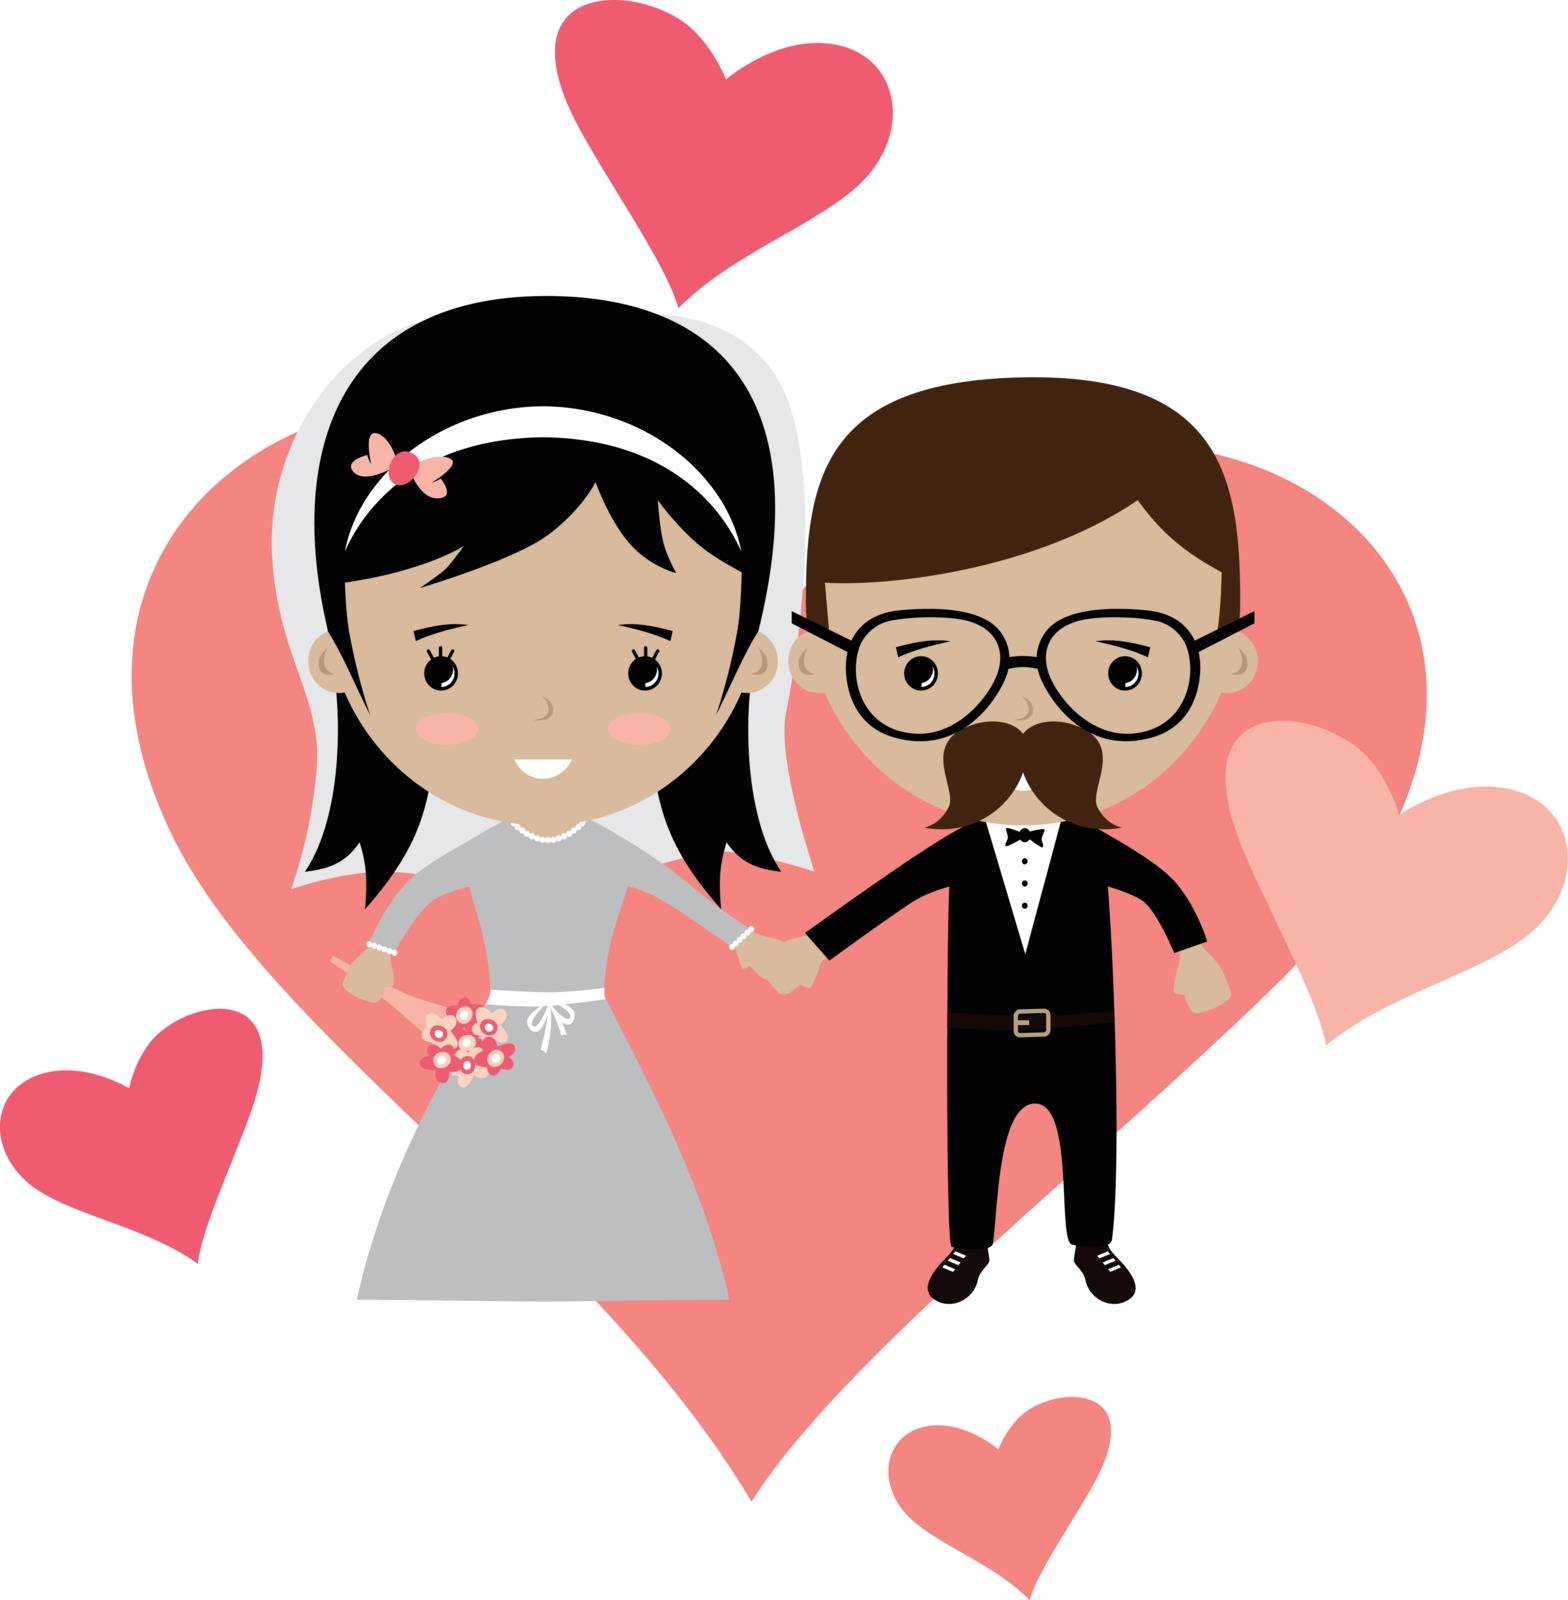 adorable groom and bride lovely marriage cartoon theme vector